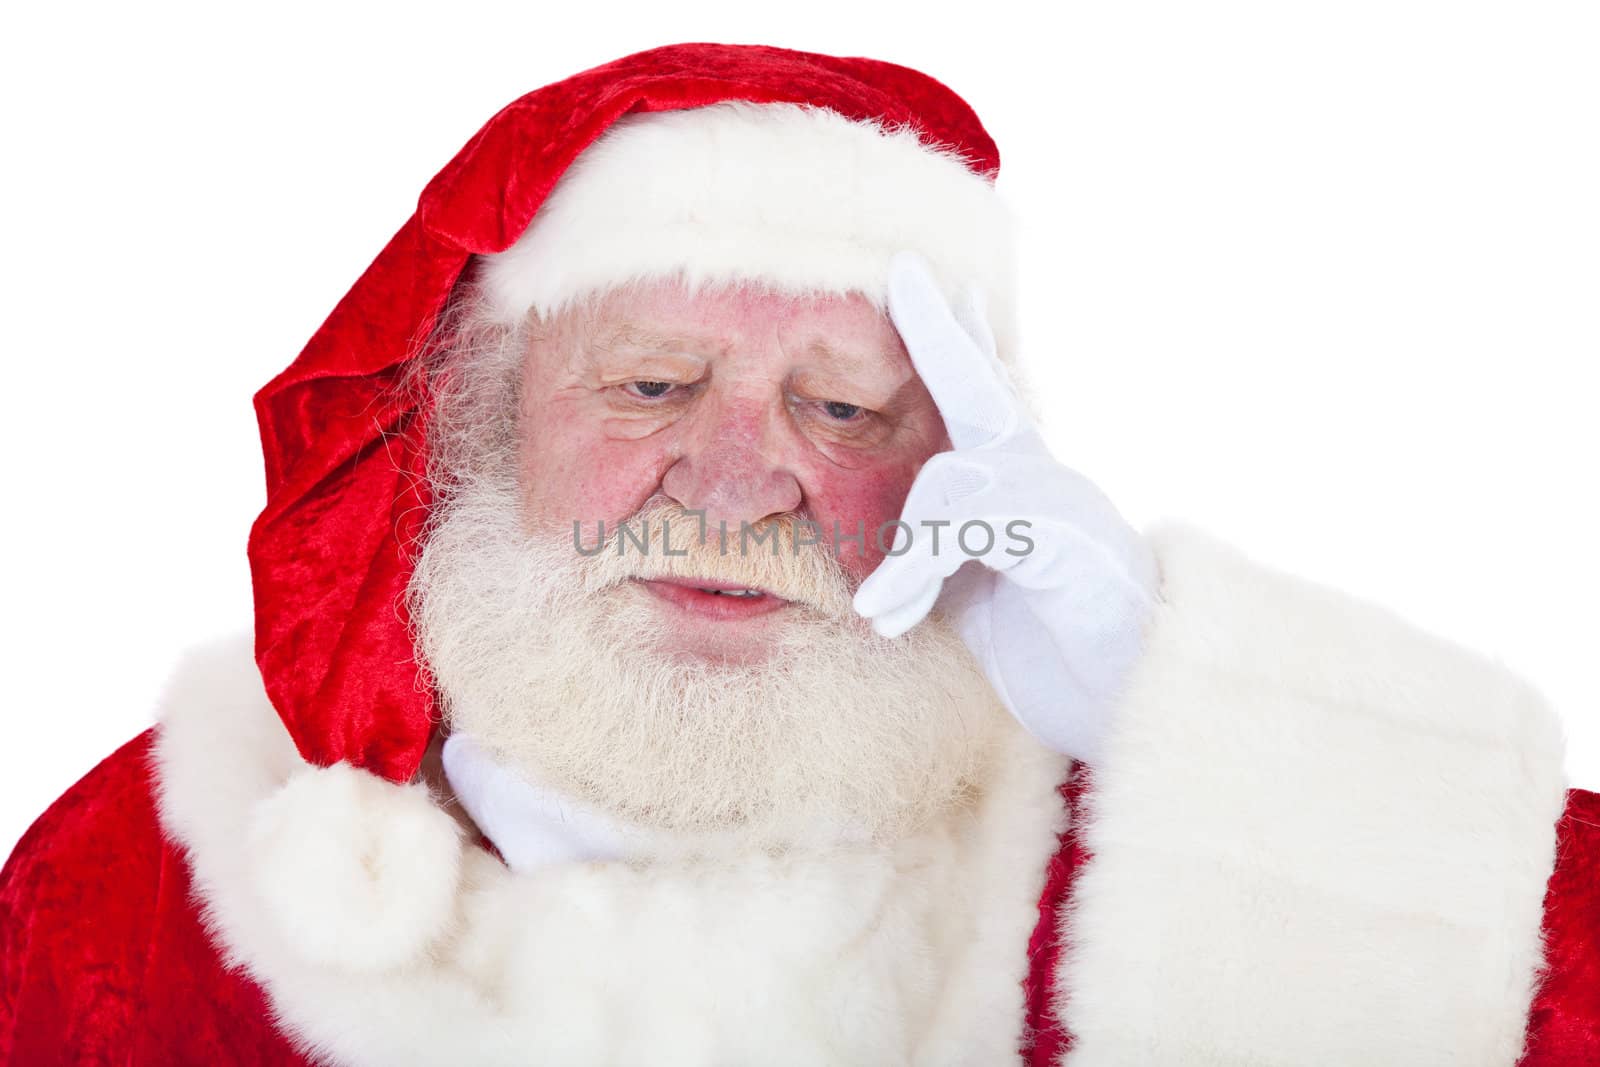 Stressed Santa Claus in authentic look. All on white background.